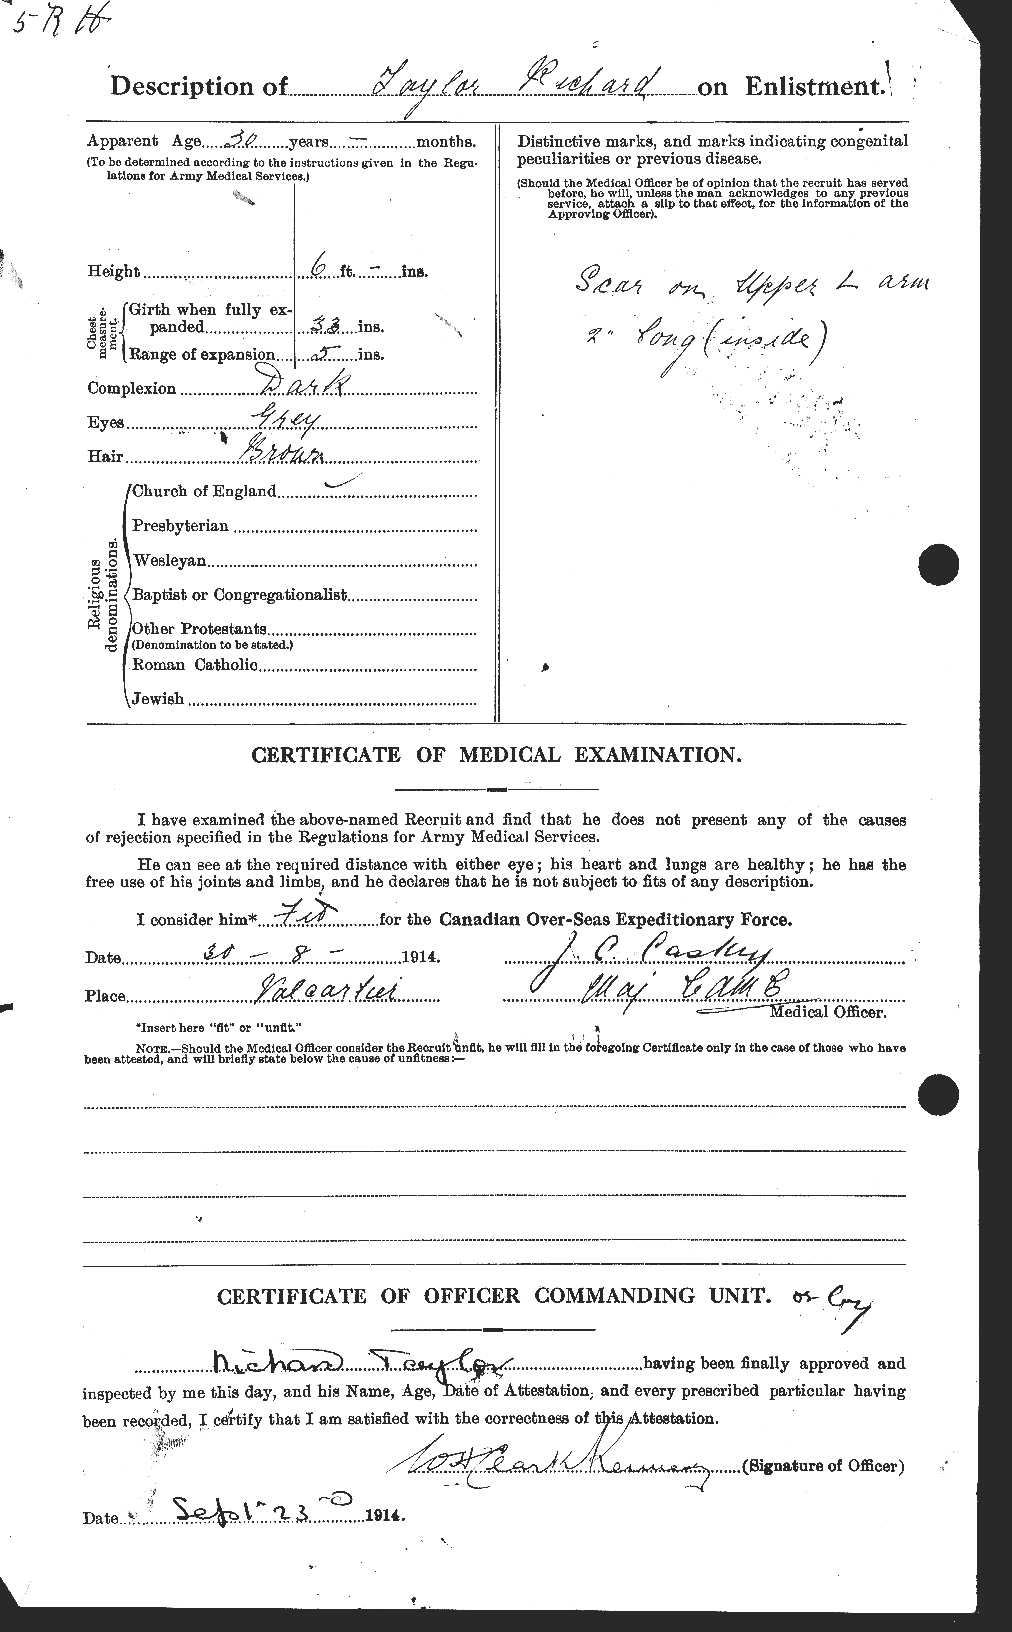 Personnel Records of the First World War - CEF 627824b